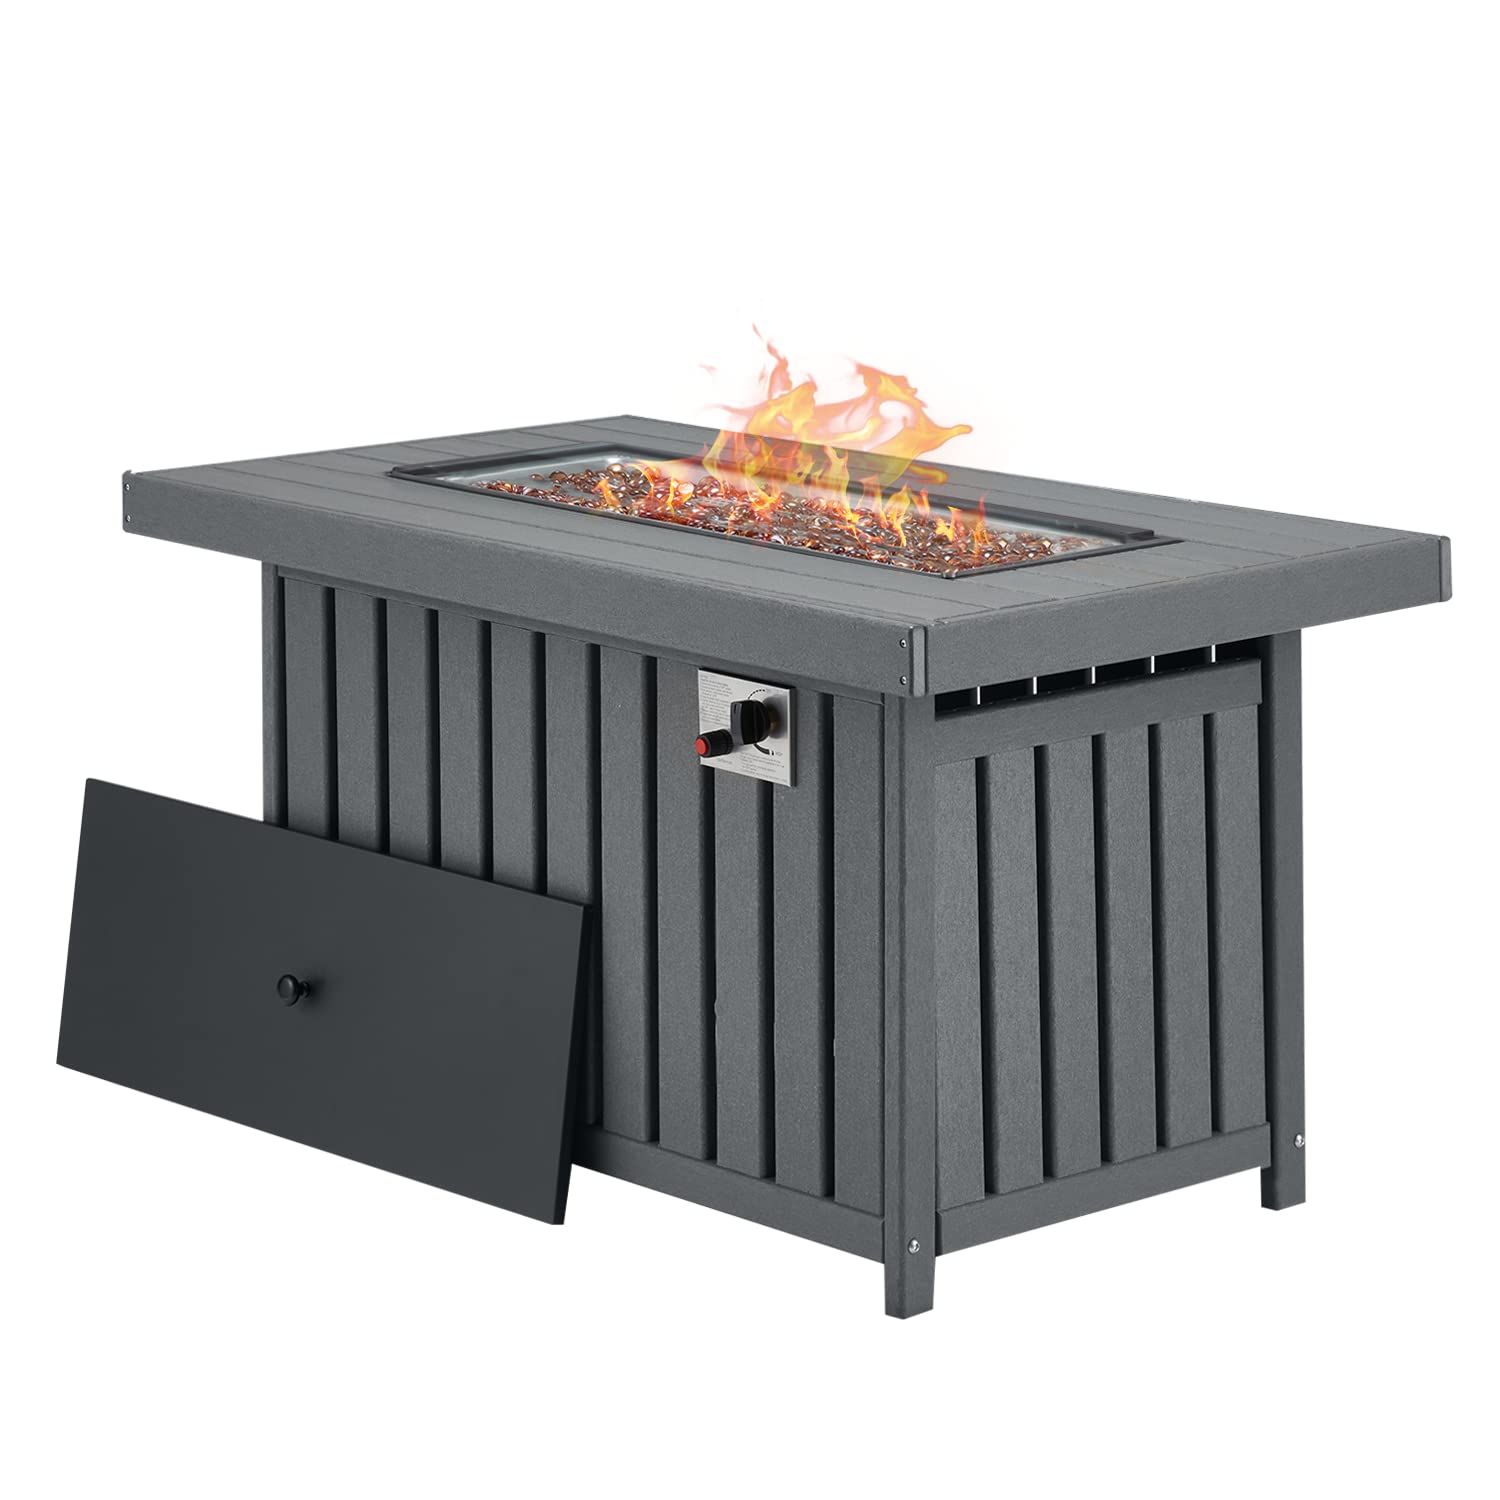 EROMMY Gas Fire Pit Table,38 Inch 50,000 BTU Round Propane Firepits with Lid and Fire Glass,CSA Certification,Add Warmth and Ambience to Gatherings and Parties on Patio Deck Garden Backyard,Brown